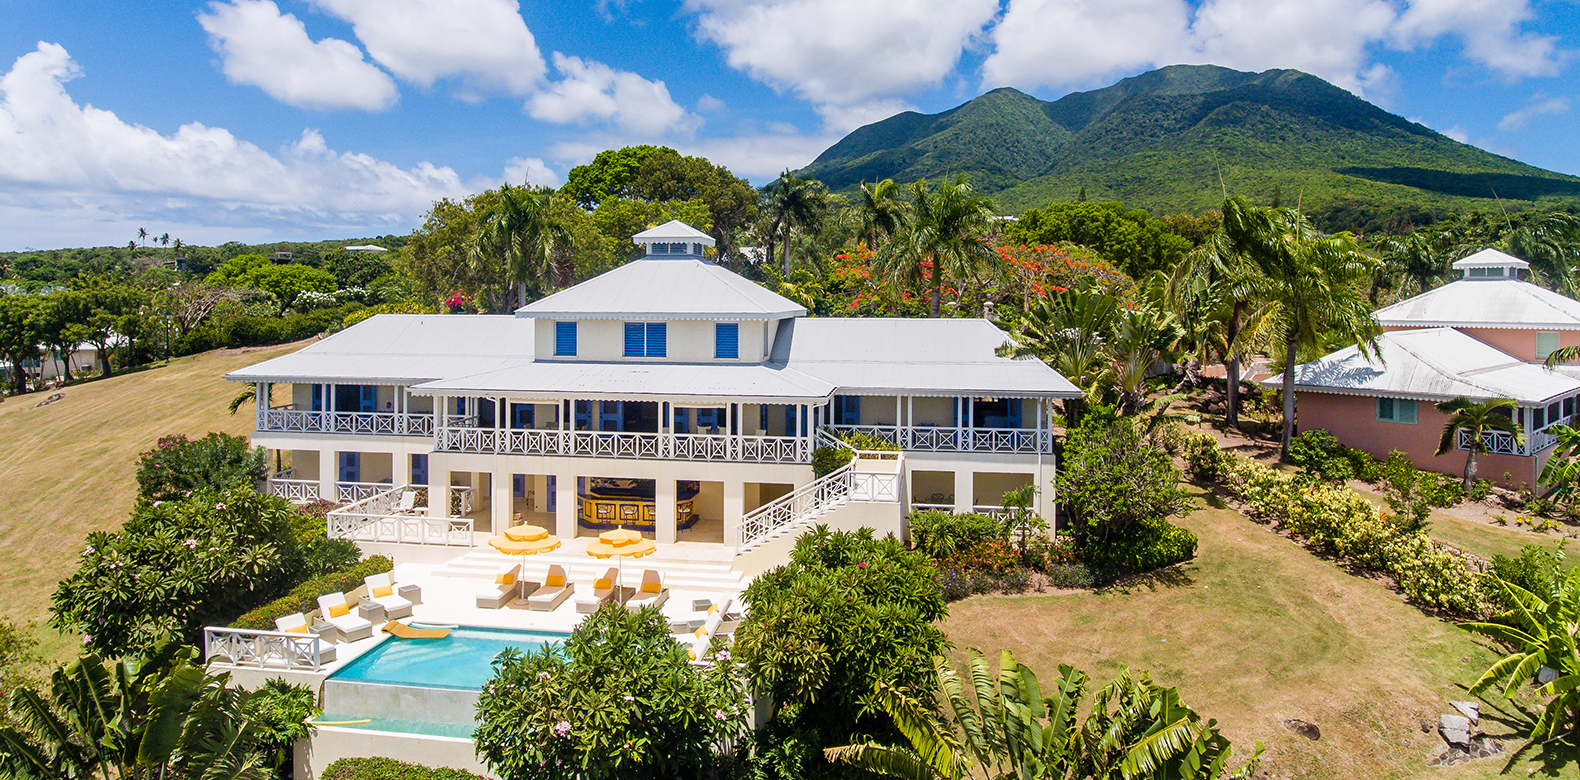  Caribbean Real Estate  for Sale Buy Real  Estate  at Four 